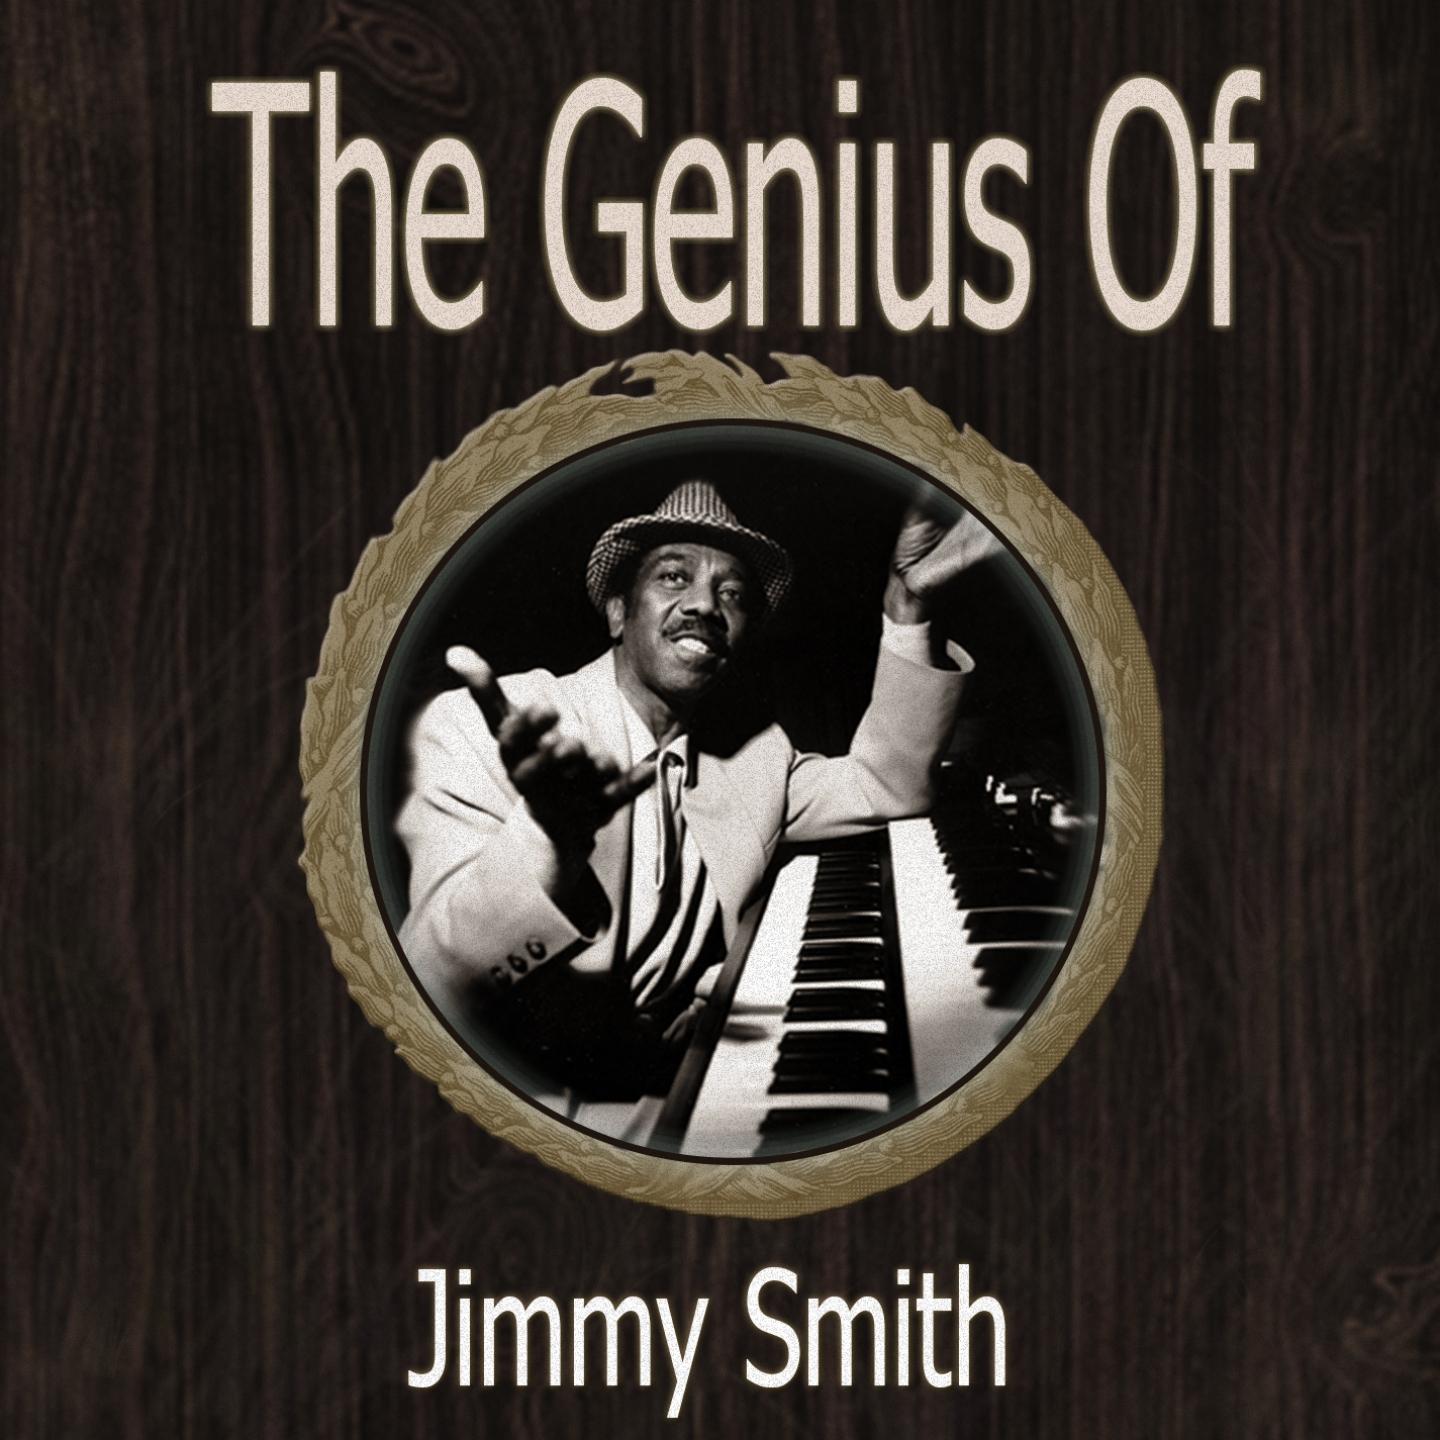 The Genius of Jimmy Smith